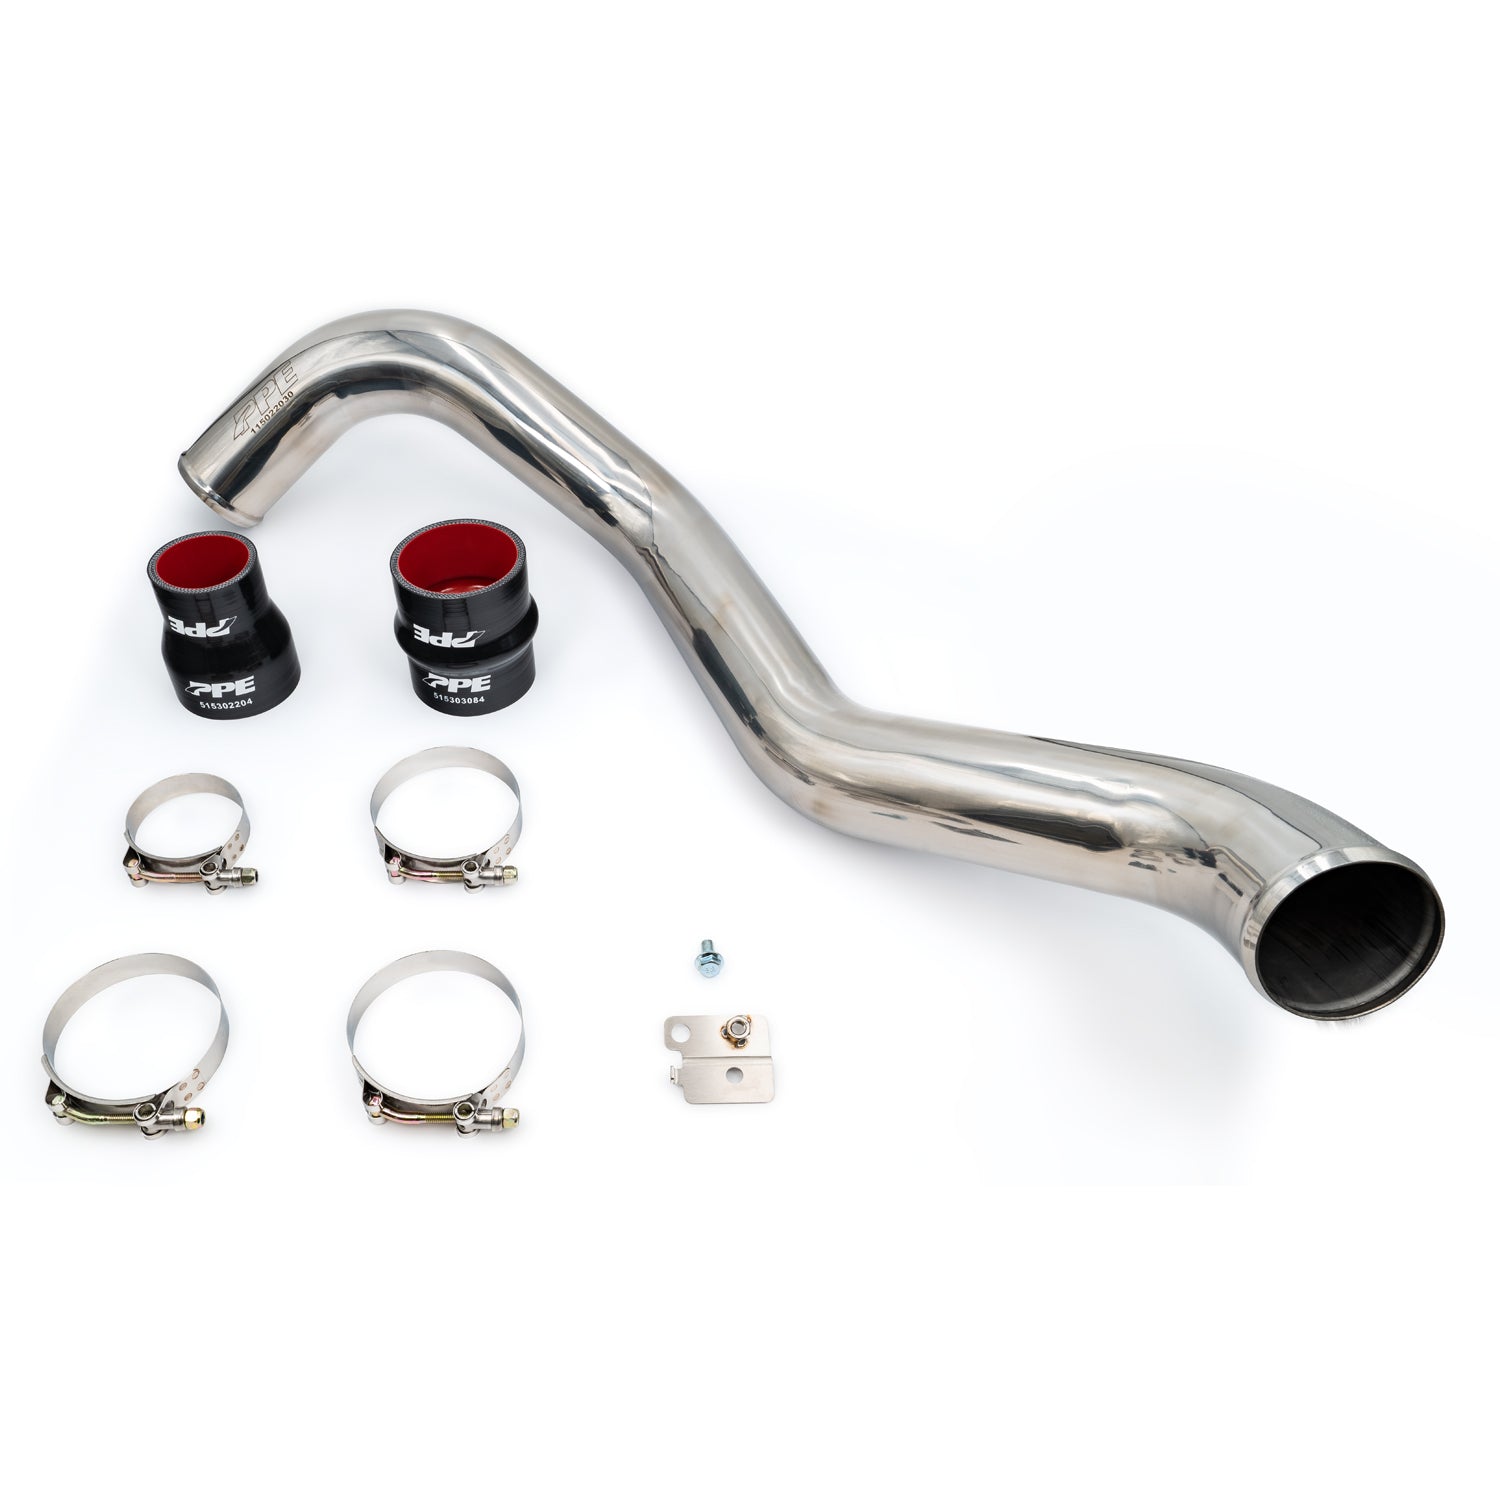 2004-2010 GM 6.6L Duramax Hot Side Intercooler Charge Pipe 3.0 Inch Stainless Steel Raw PPE Diesel